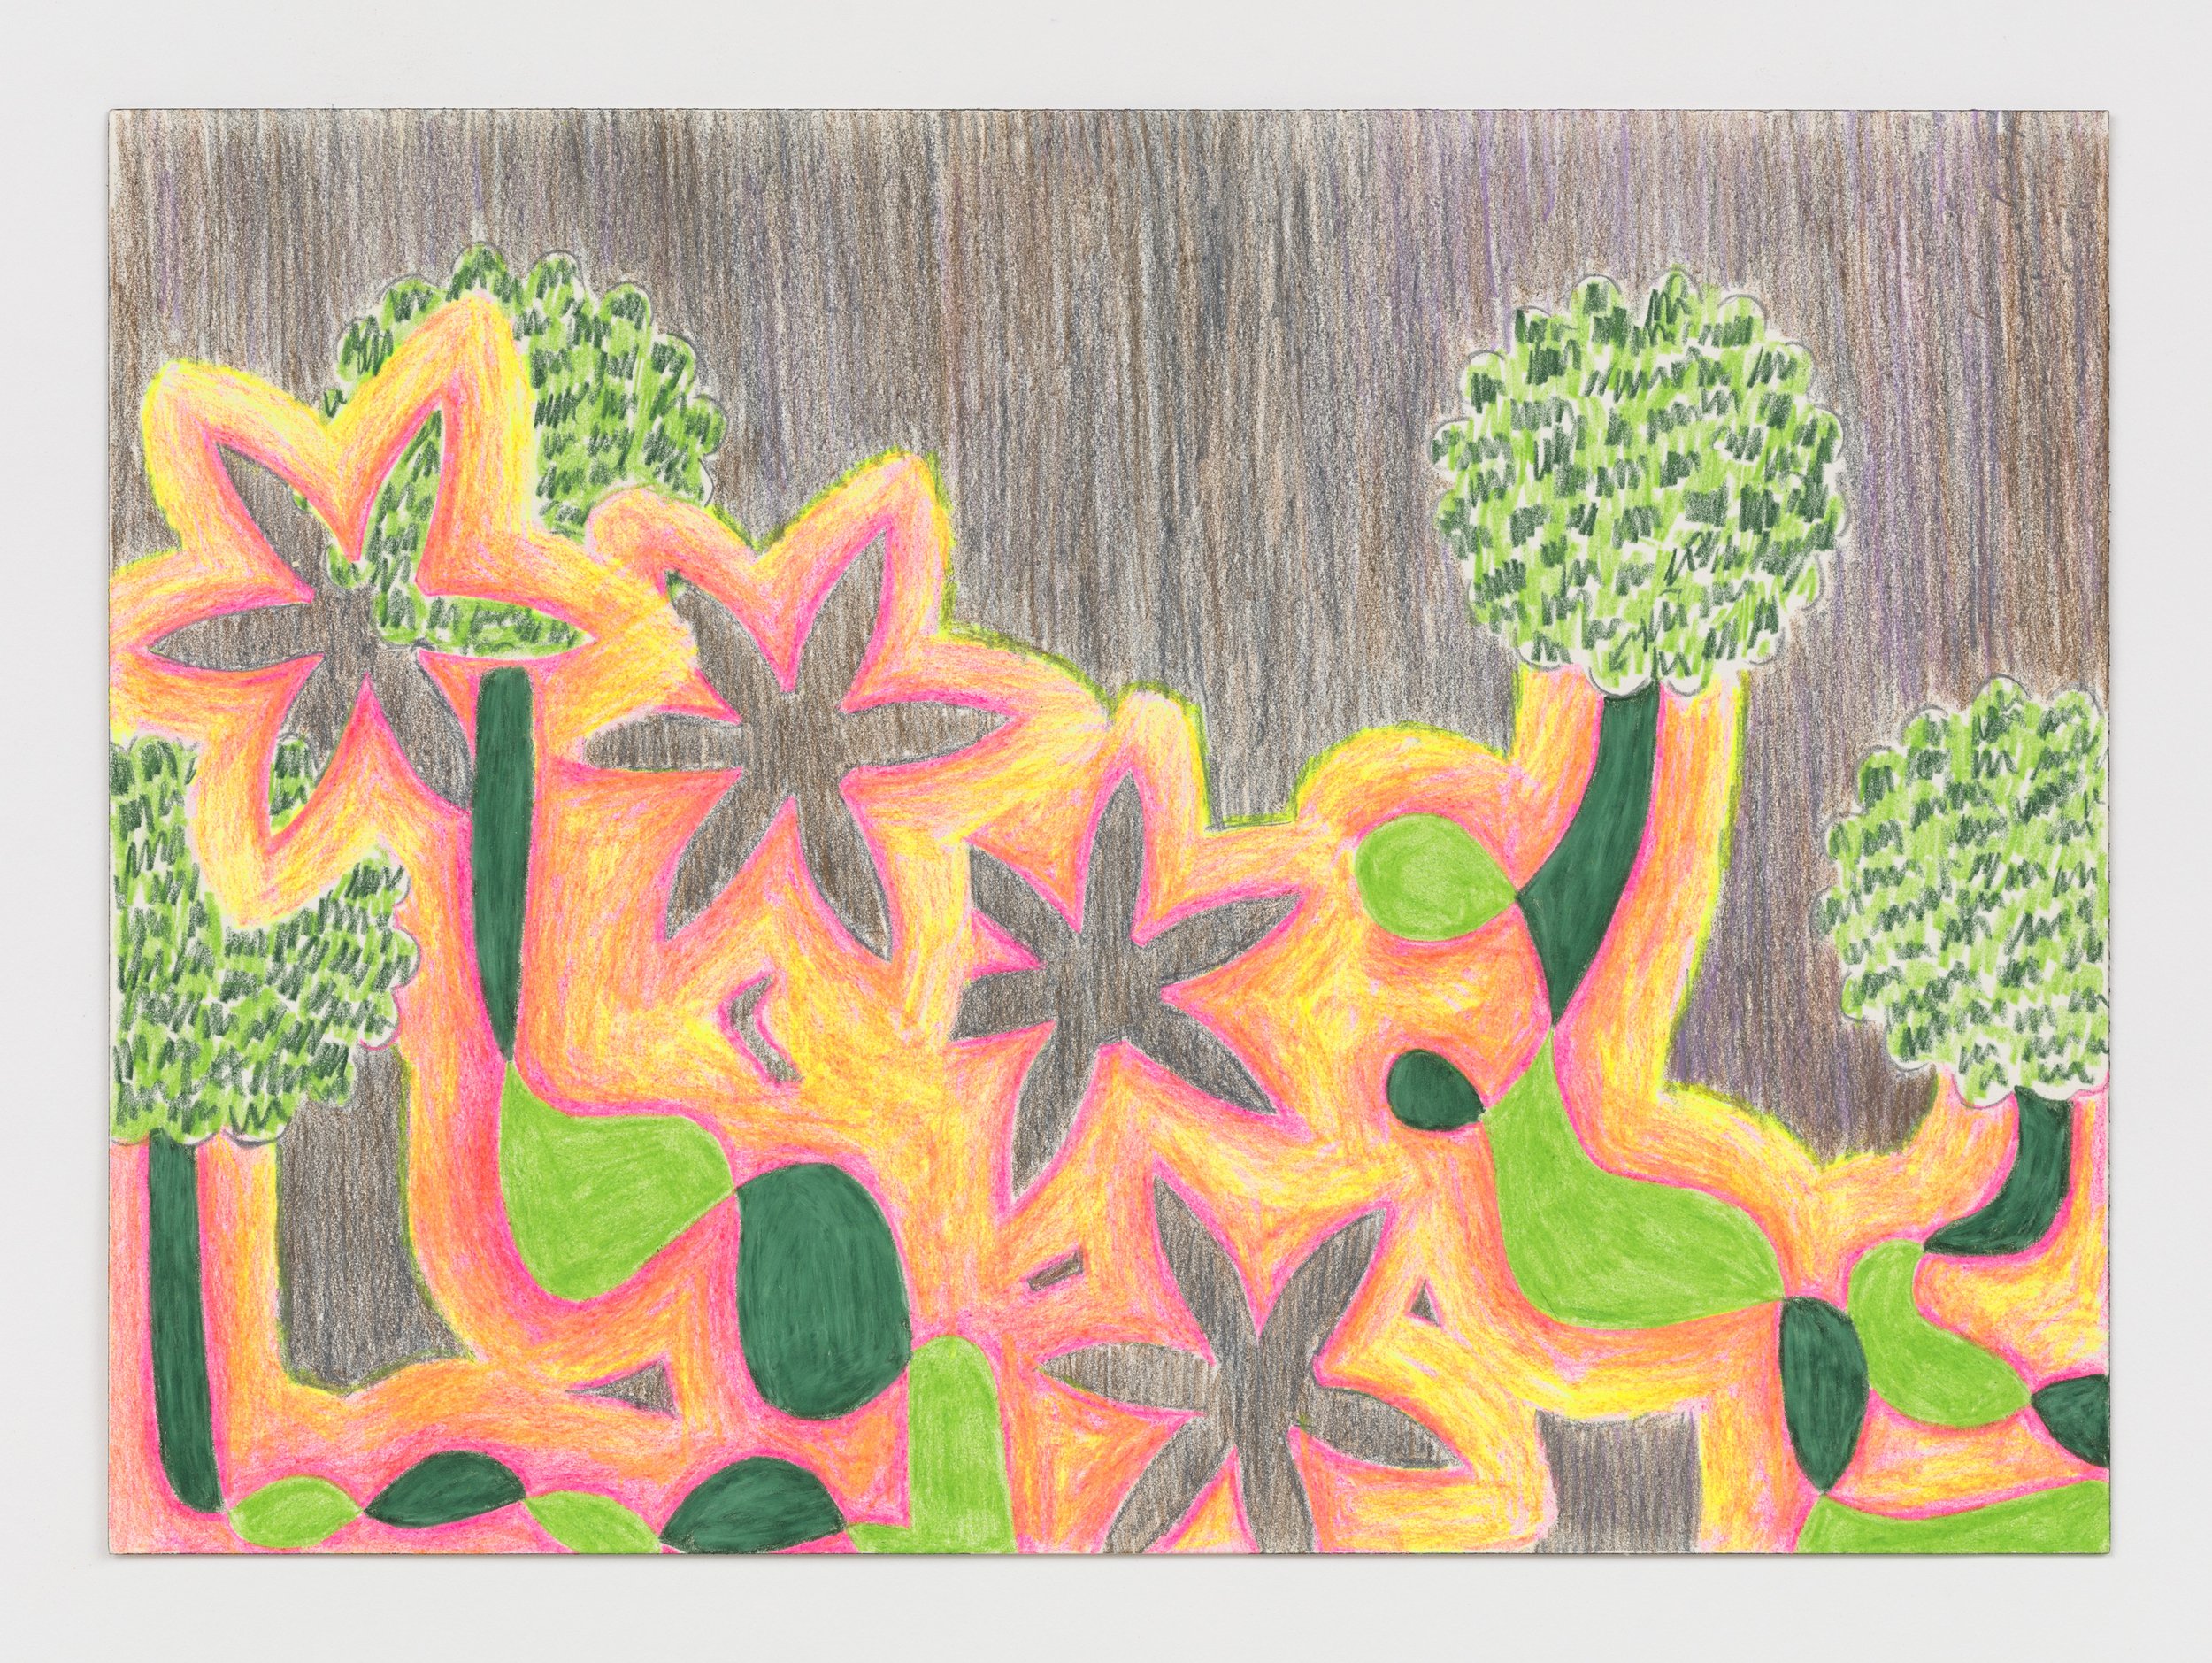   Dune Fauna  2020 colored pencil on paper 14 x 10 inches 